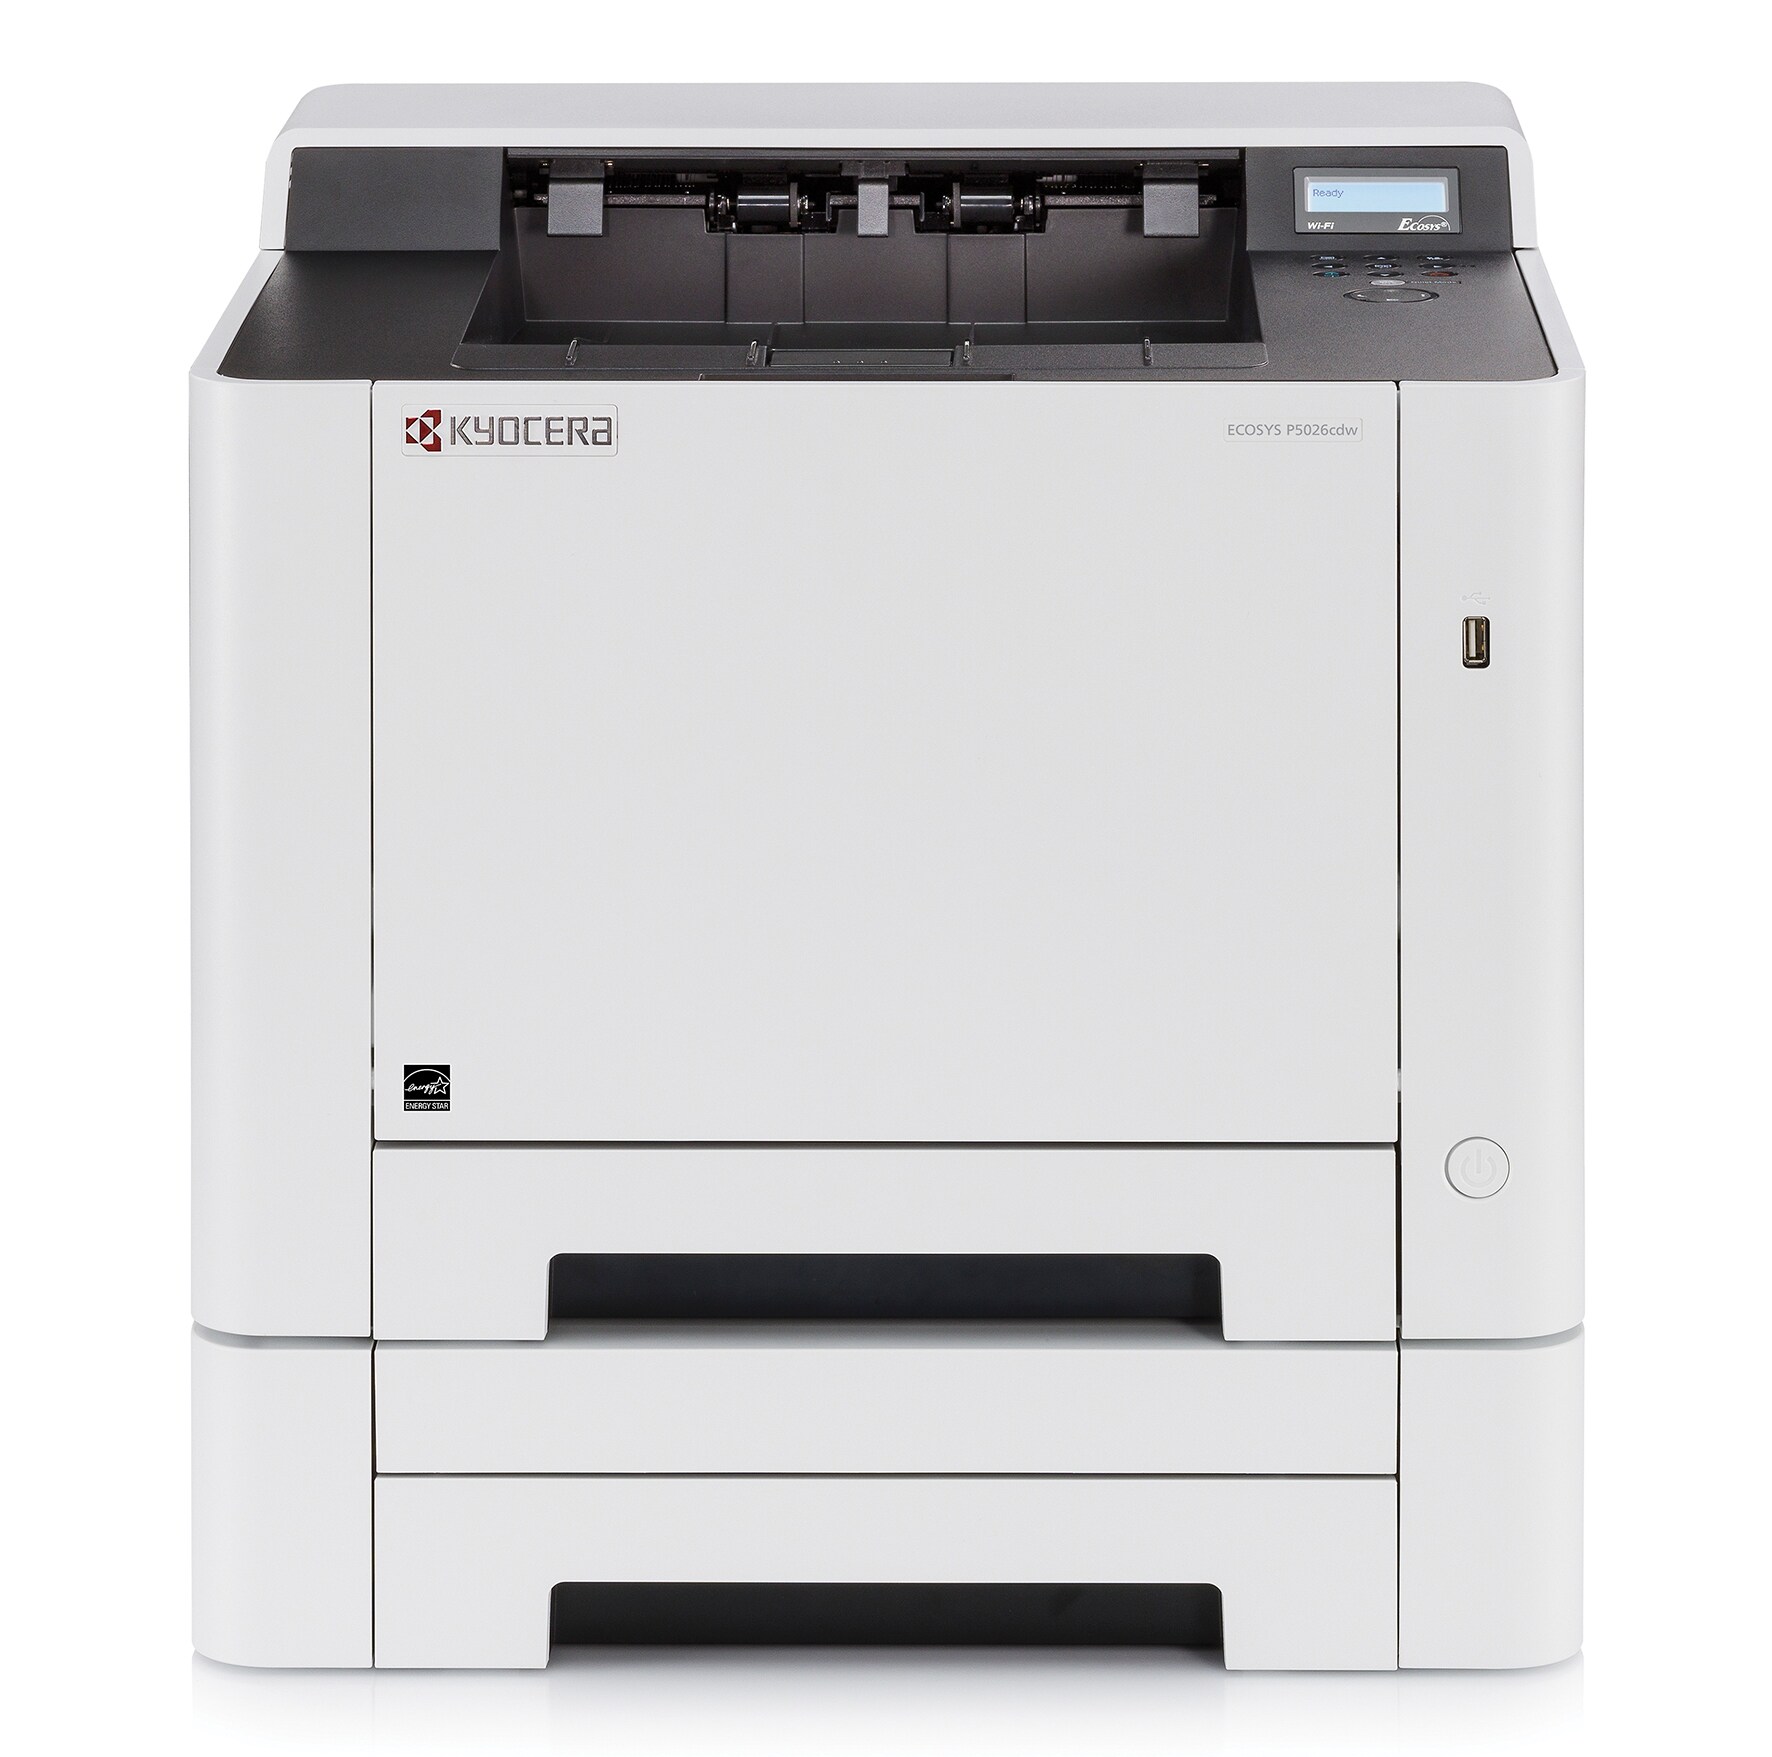 Kyocera ECOSYS P5026cdw 2 Line LCD 27ppm Color Laser Printer